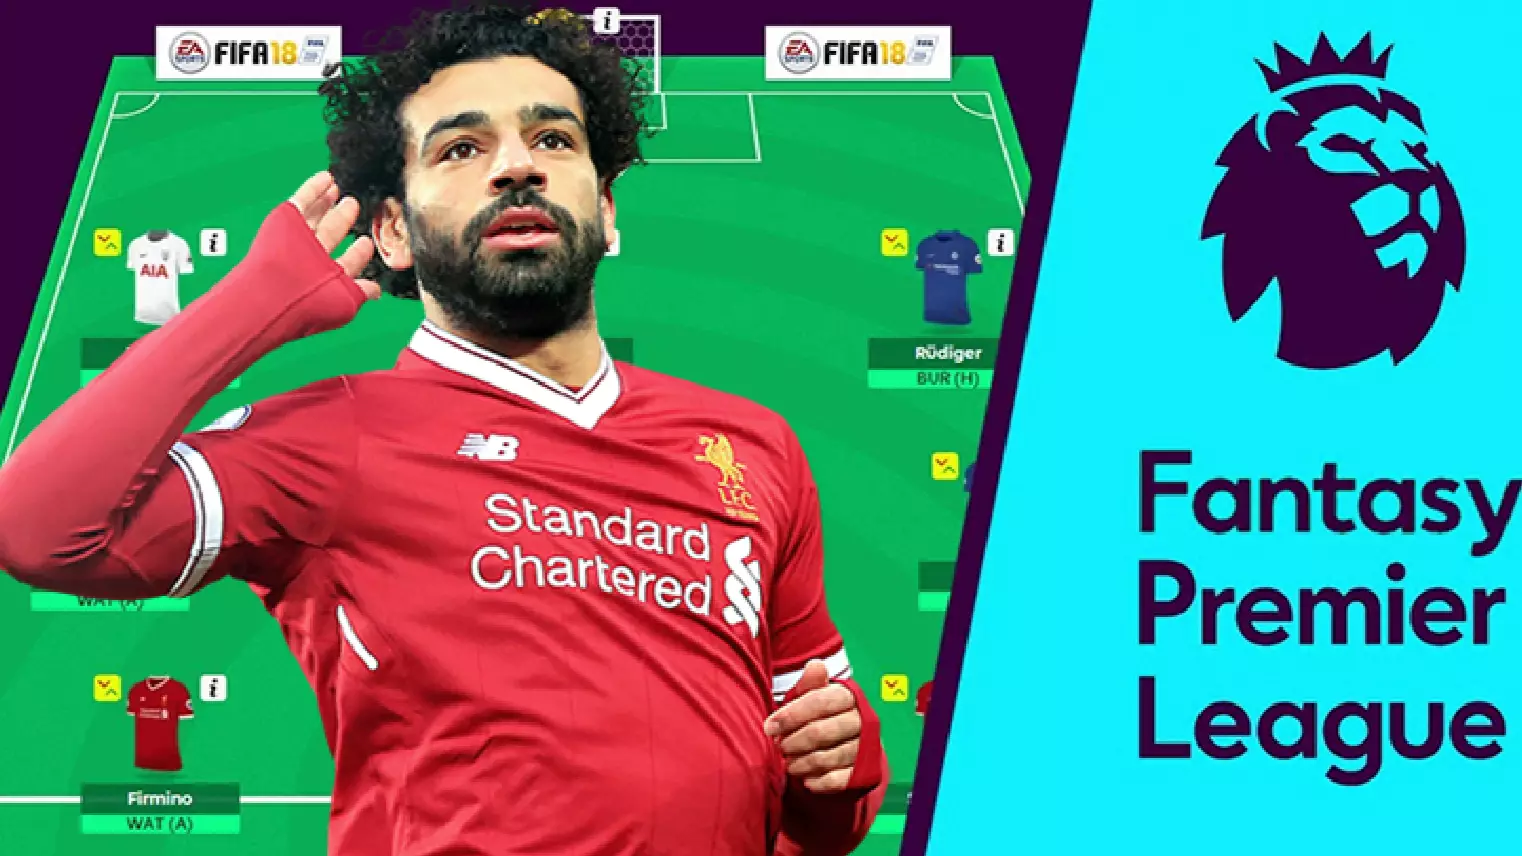 Mohamed Salah Reveals His Fantasy Football Team And It Includes Himself